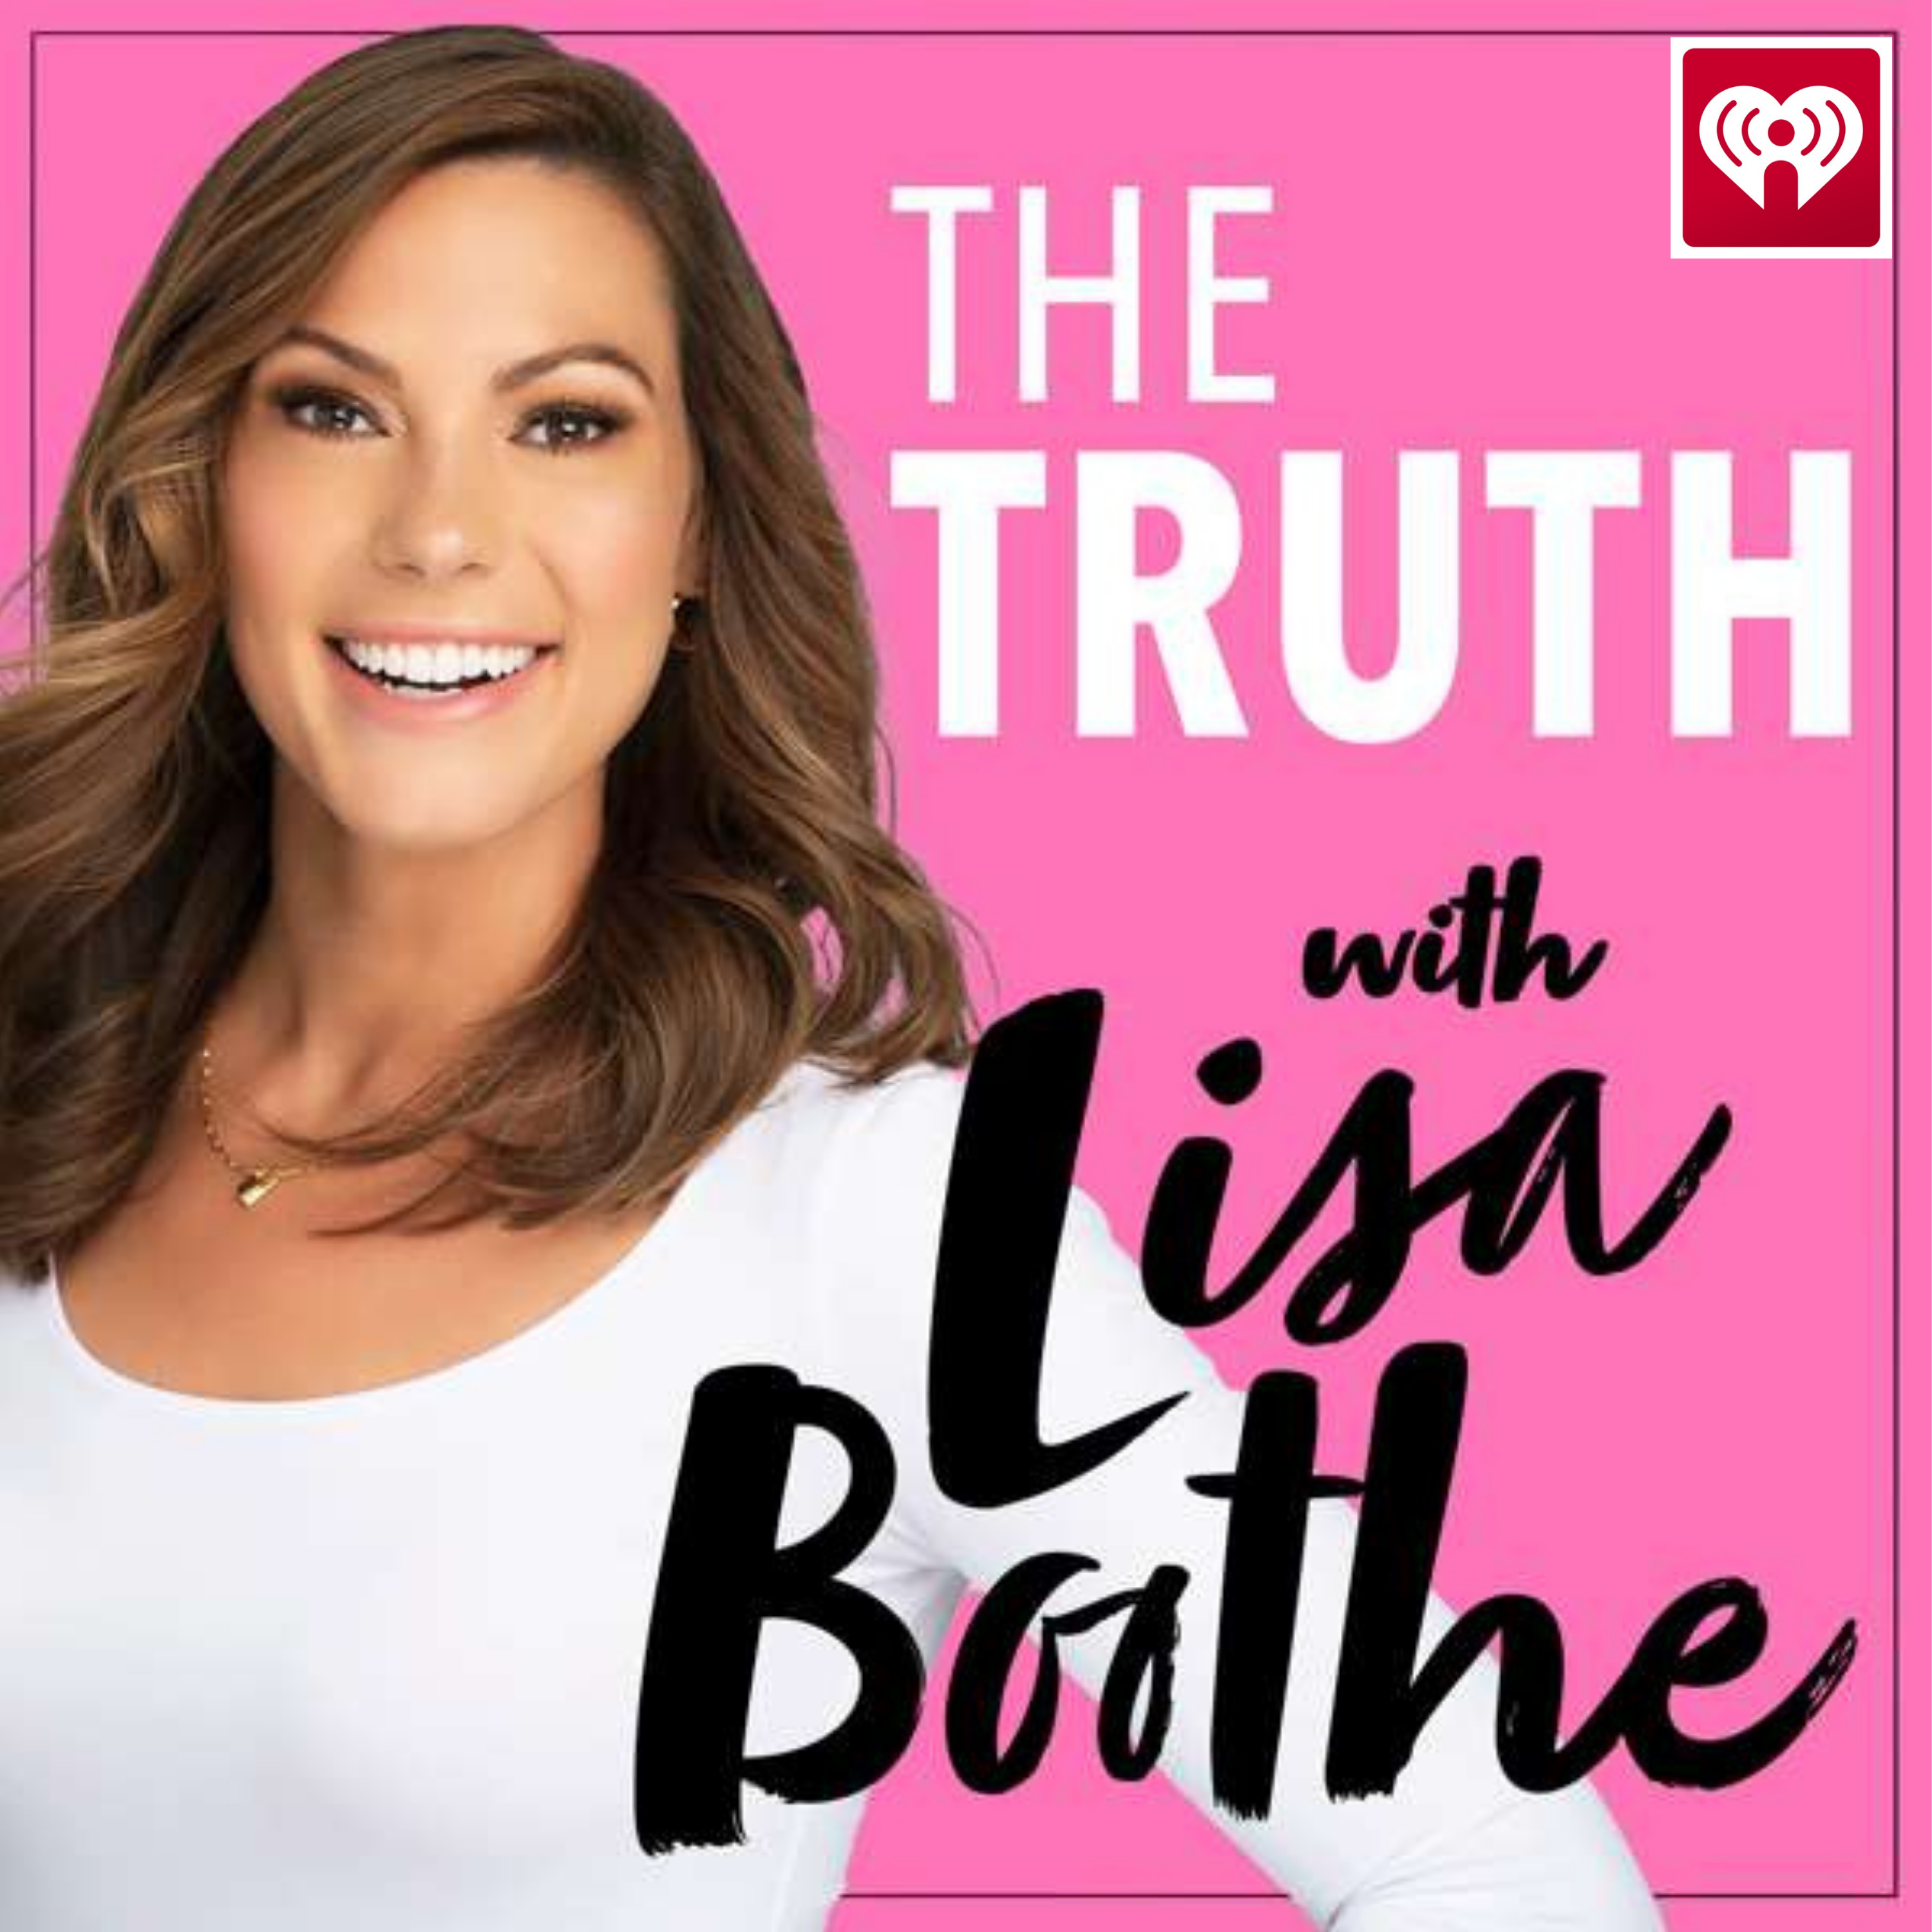 The Truth with Lisa Boothe:  How the Elites Betrayed America’s Working Class with Batya Ungar-Sargon